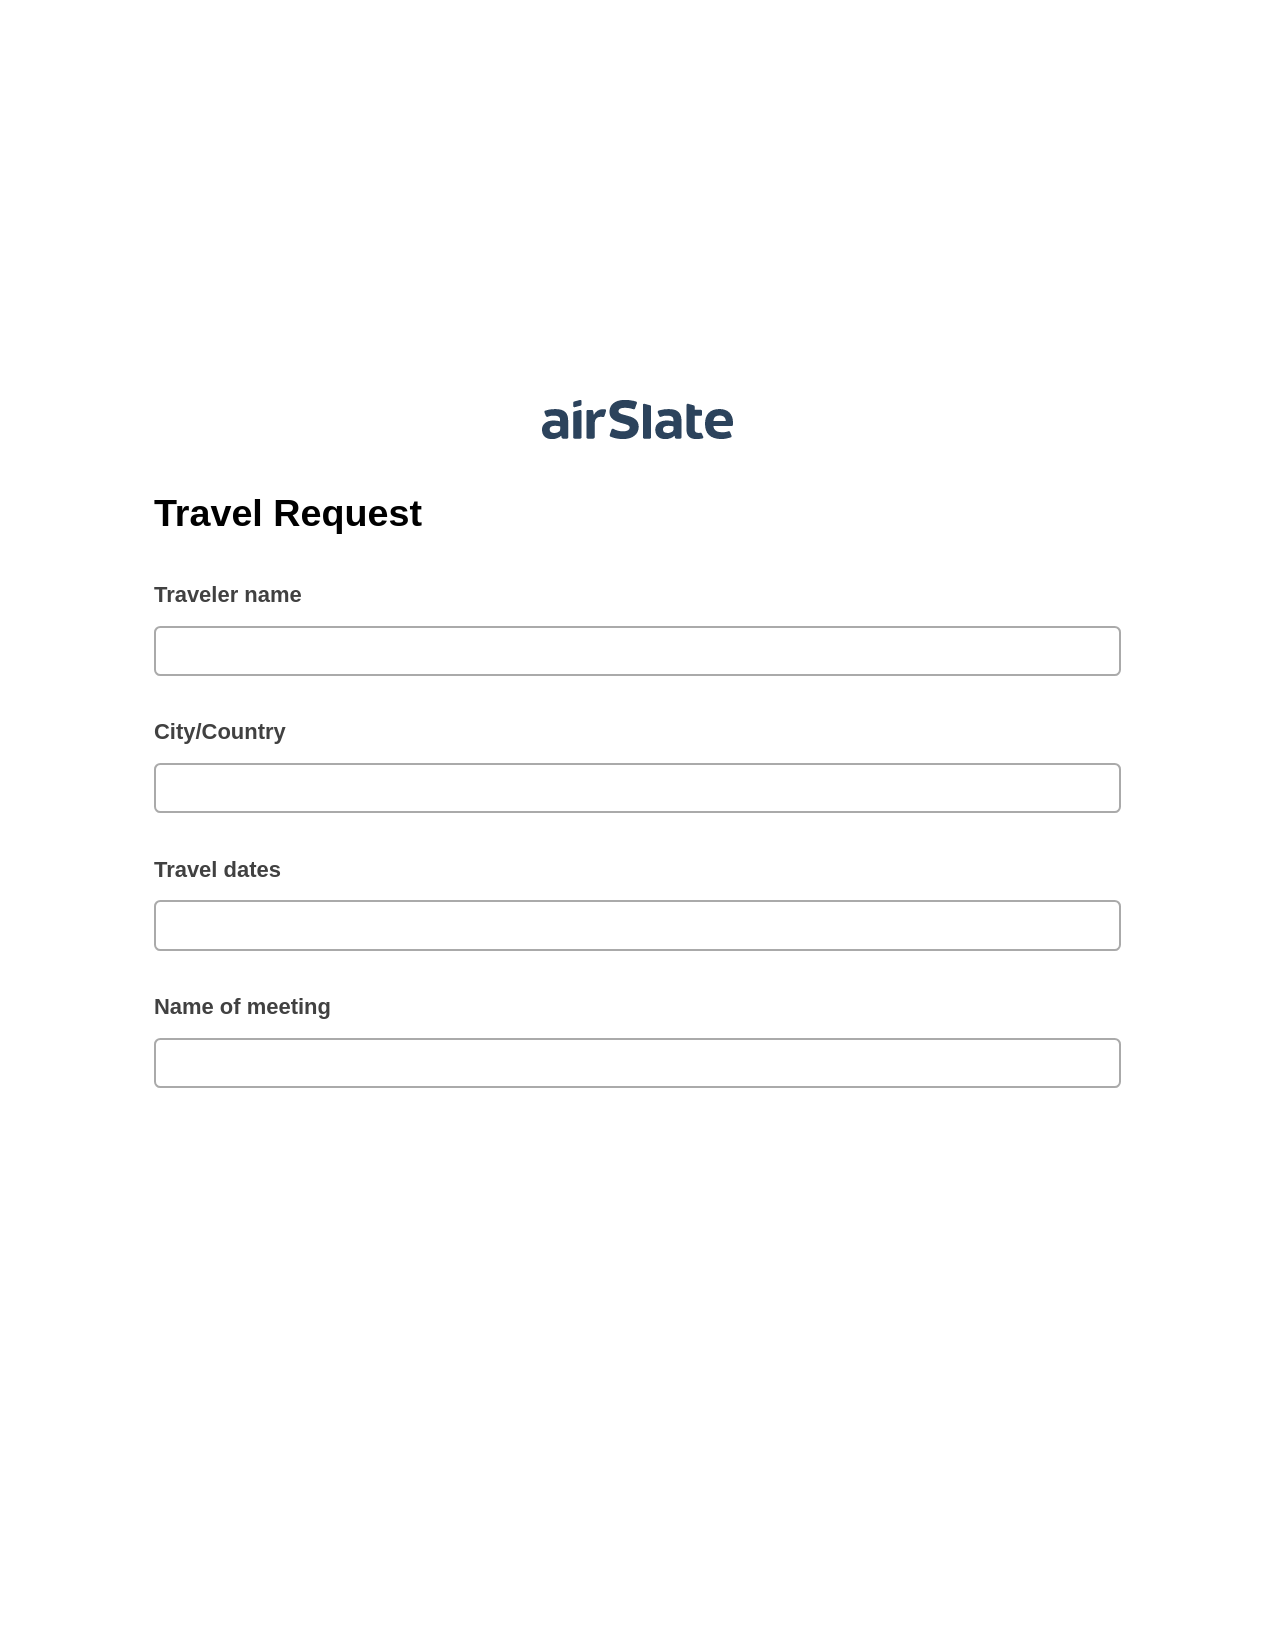 Travel Request Pre-fill from Excel Spreadsheet Bot, Create slate addon, Export to Smartsheet